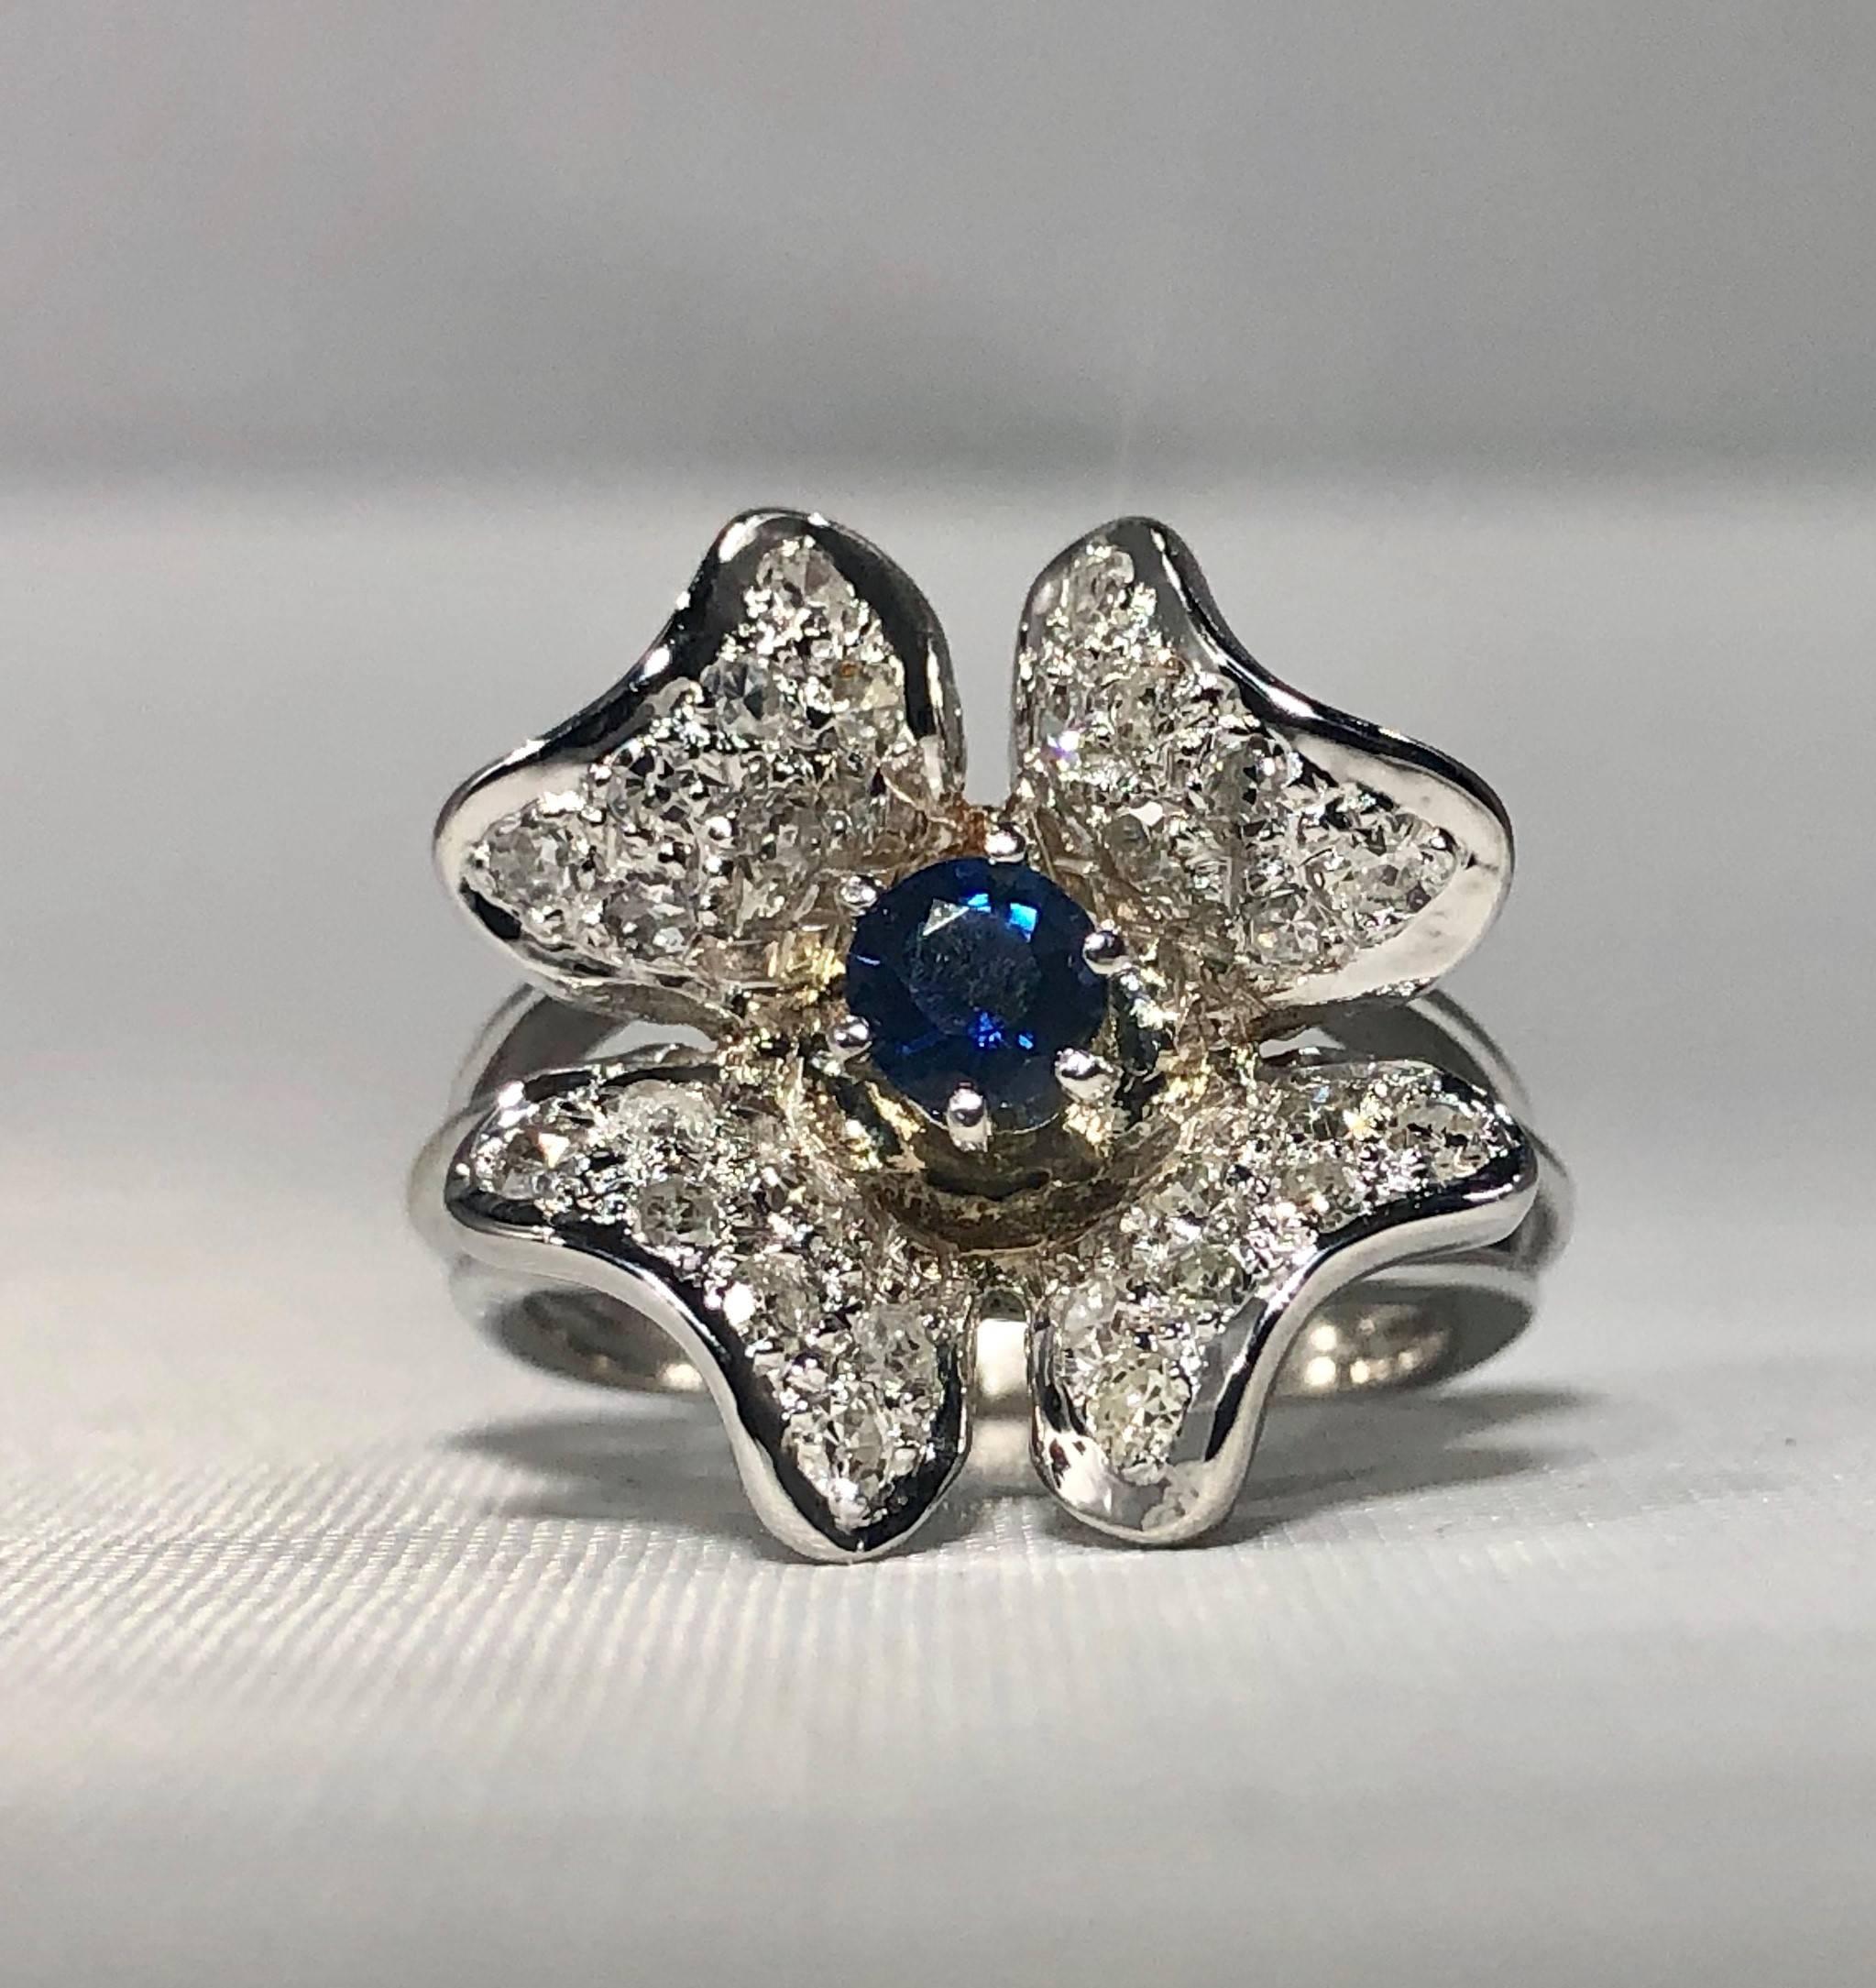 Vintage 1970s 14 Karat Sapphire and Diamond Flower Cocktail Ring In Excellent Condition For Sale In Mansfield, OH